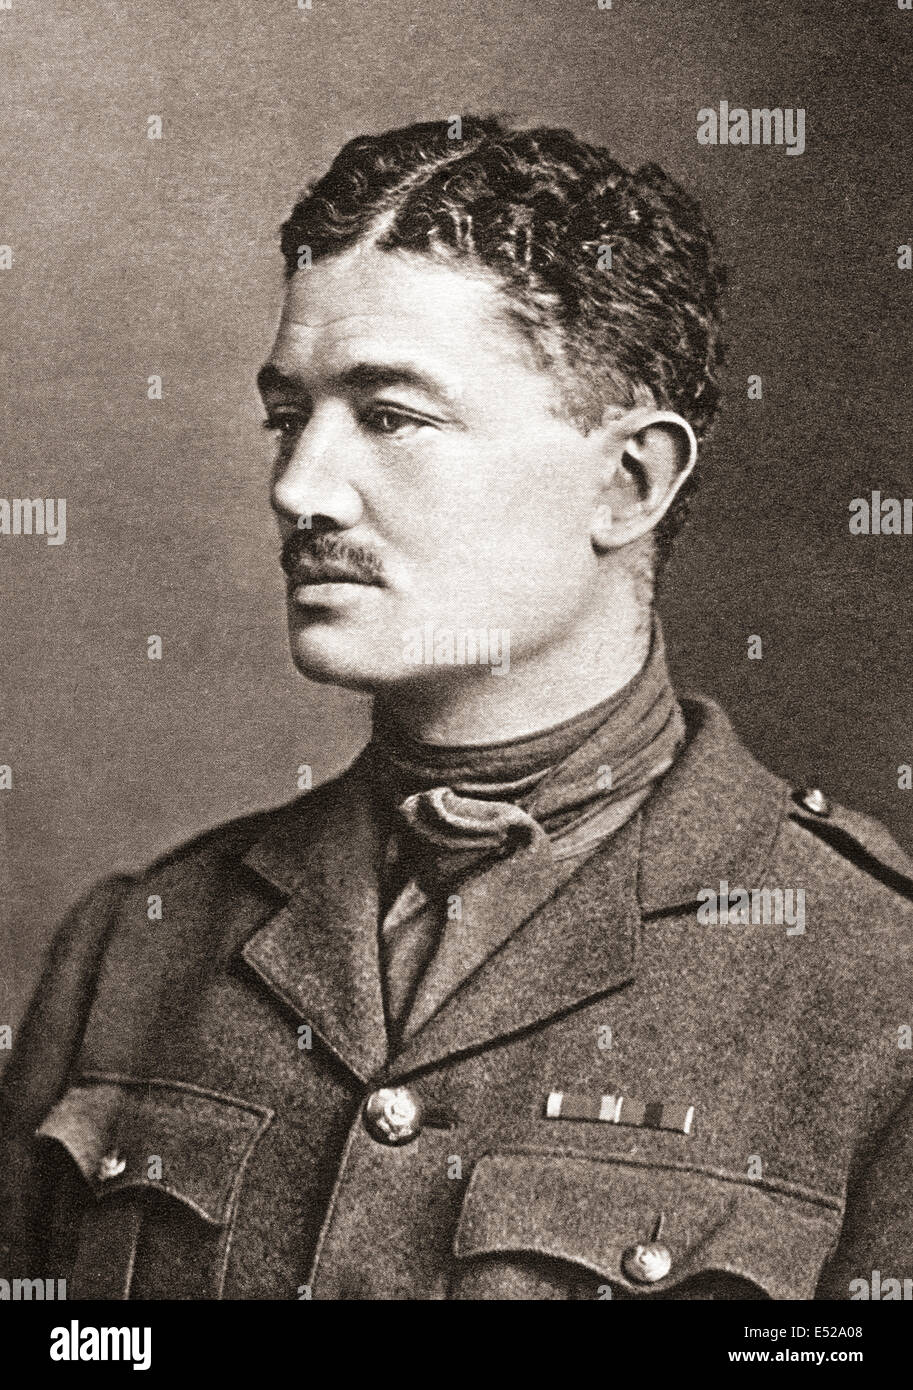 The Honourable Julian Henry Francis Grenfell DSO, 1888 –1915.  British soldier and poet of World War I. Stock Photo